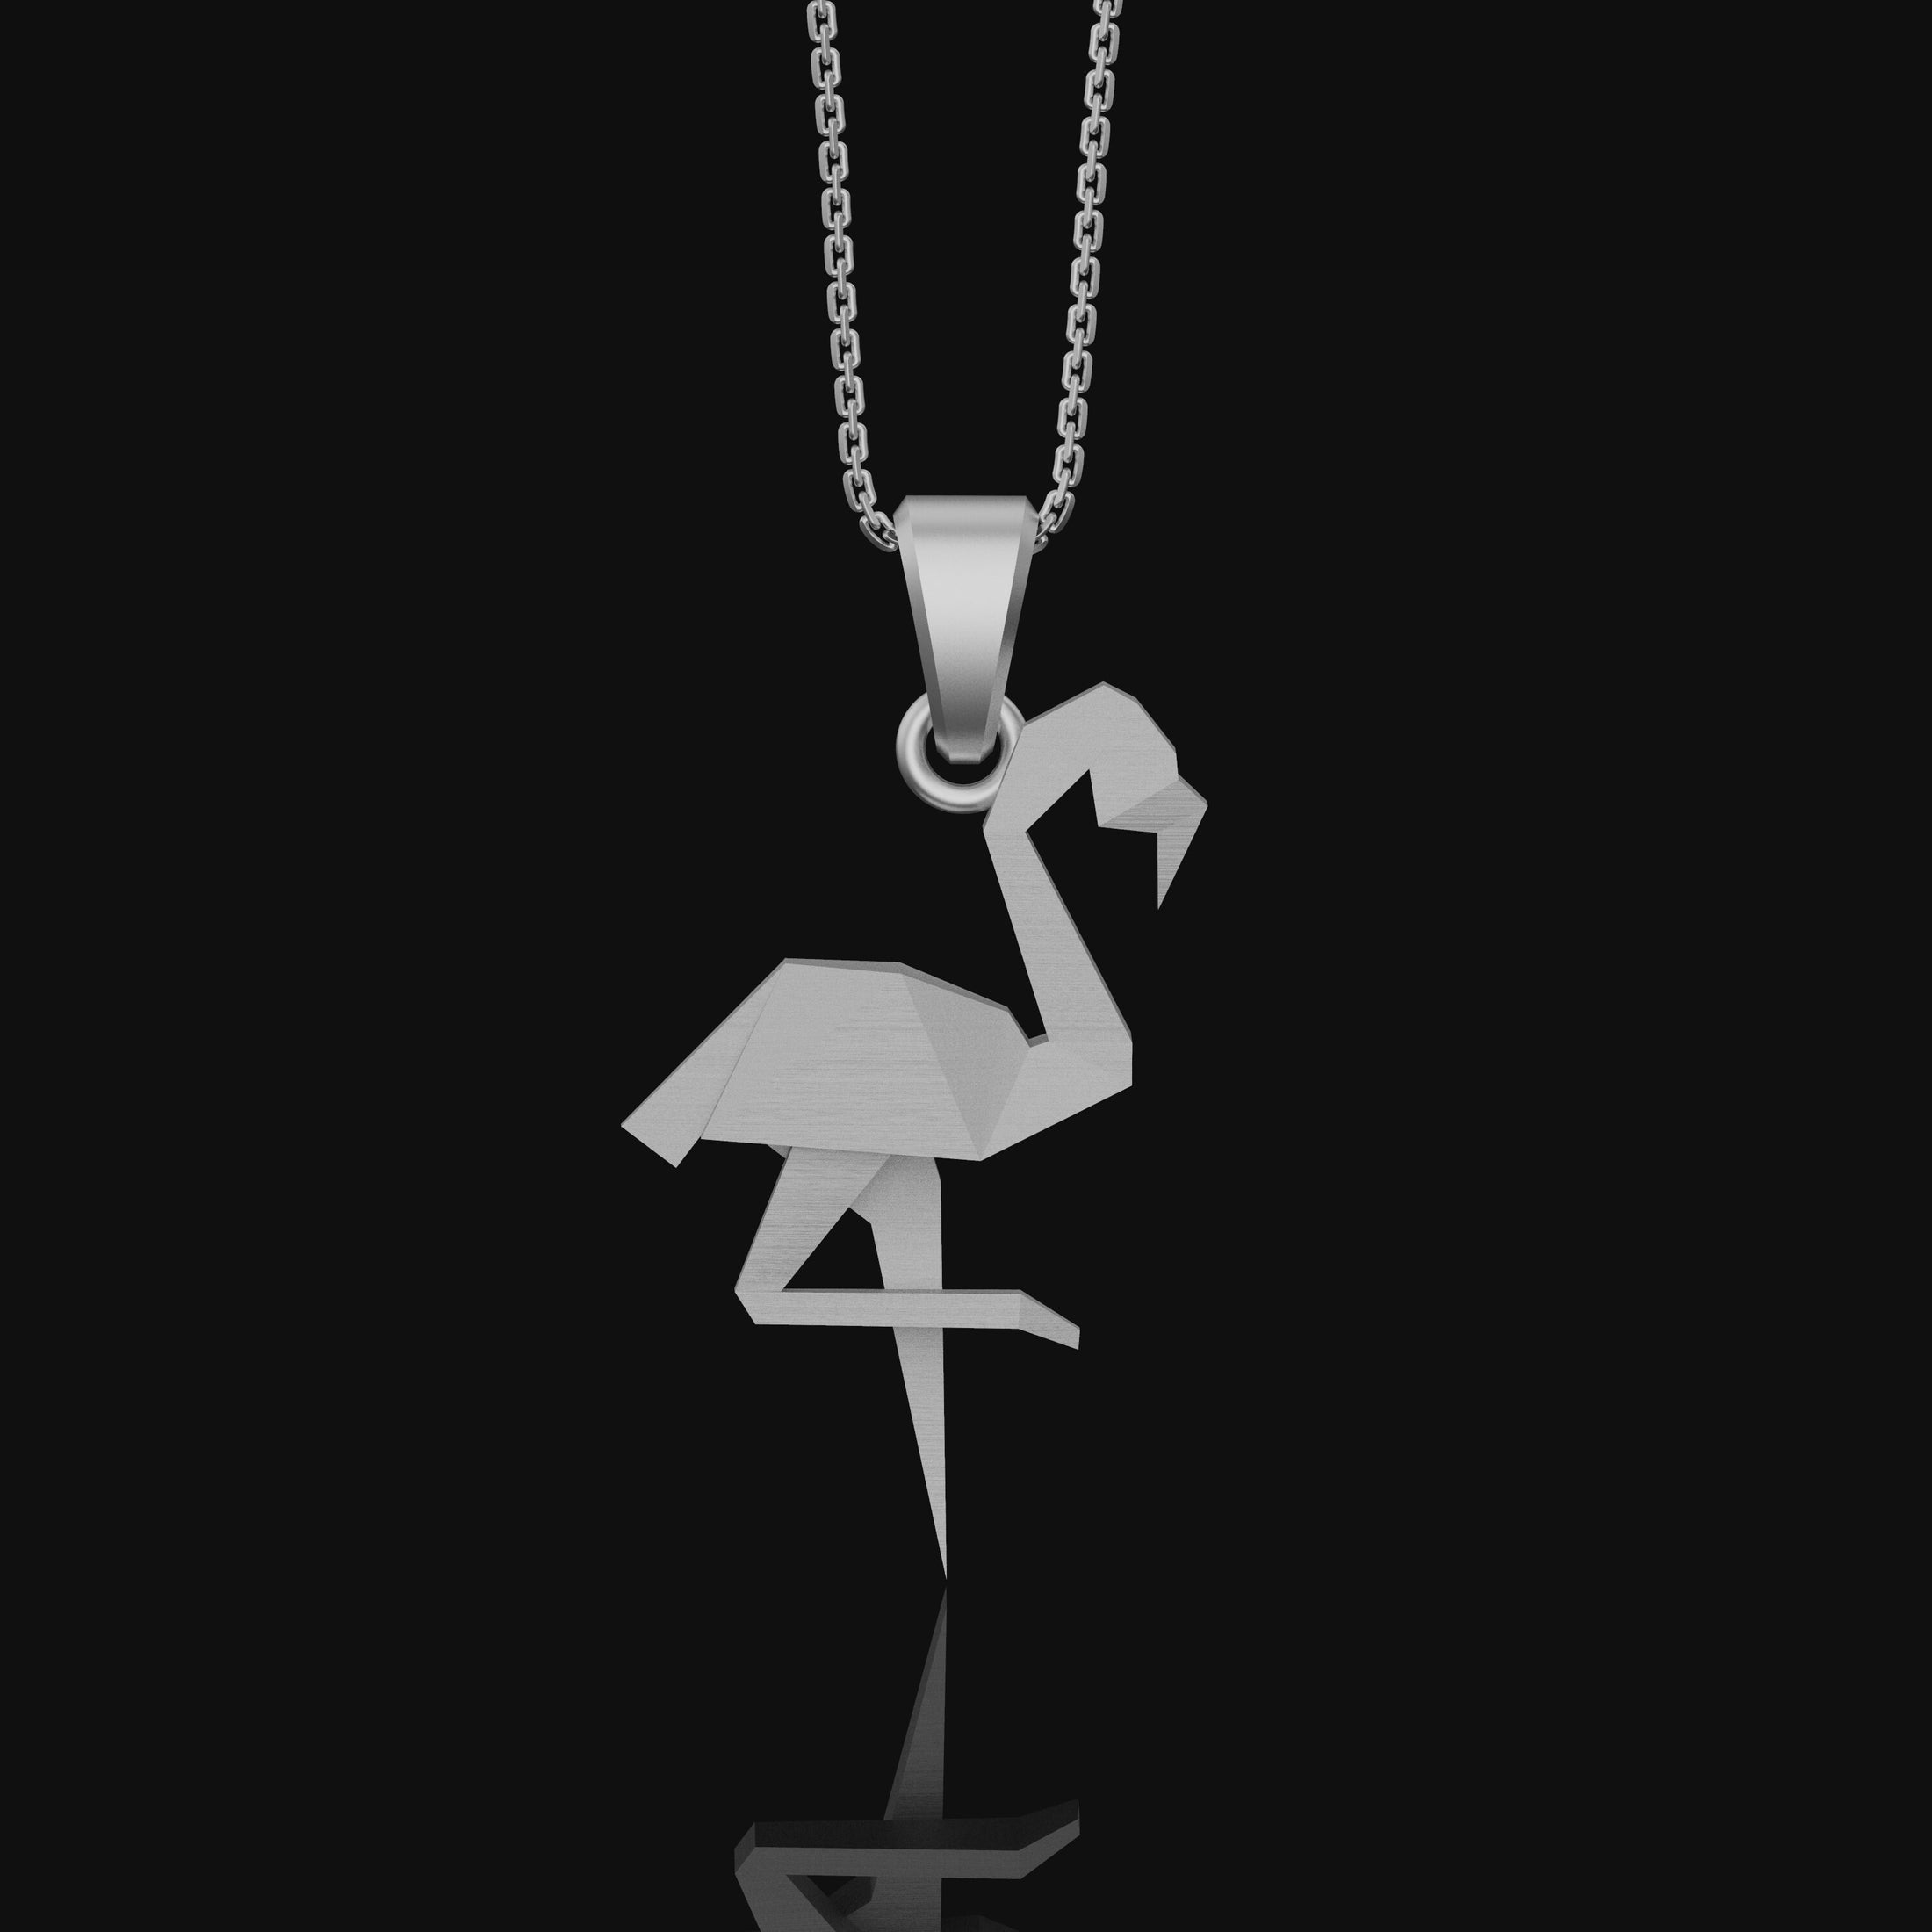 Silver Origami Flamingo Necklace Gift for her, Geometric Necklace, Bird Charm, Flamingo Pendant, Christmas Gift, Origami Animal Polished Matte